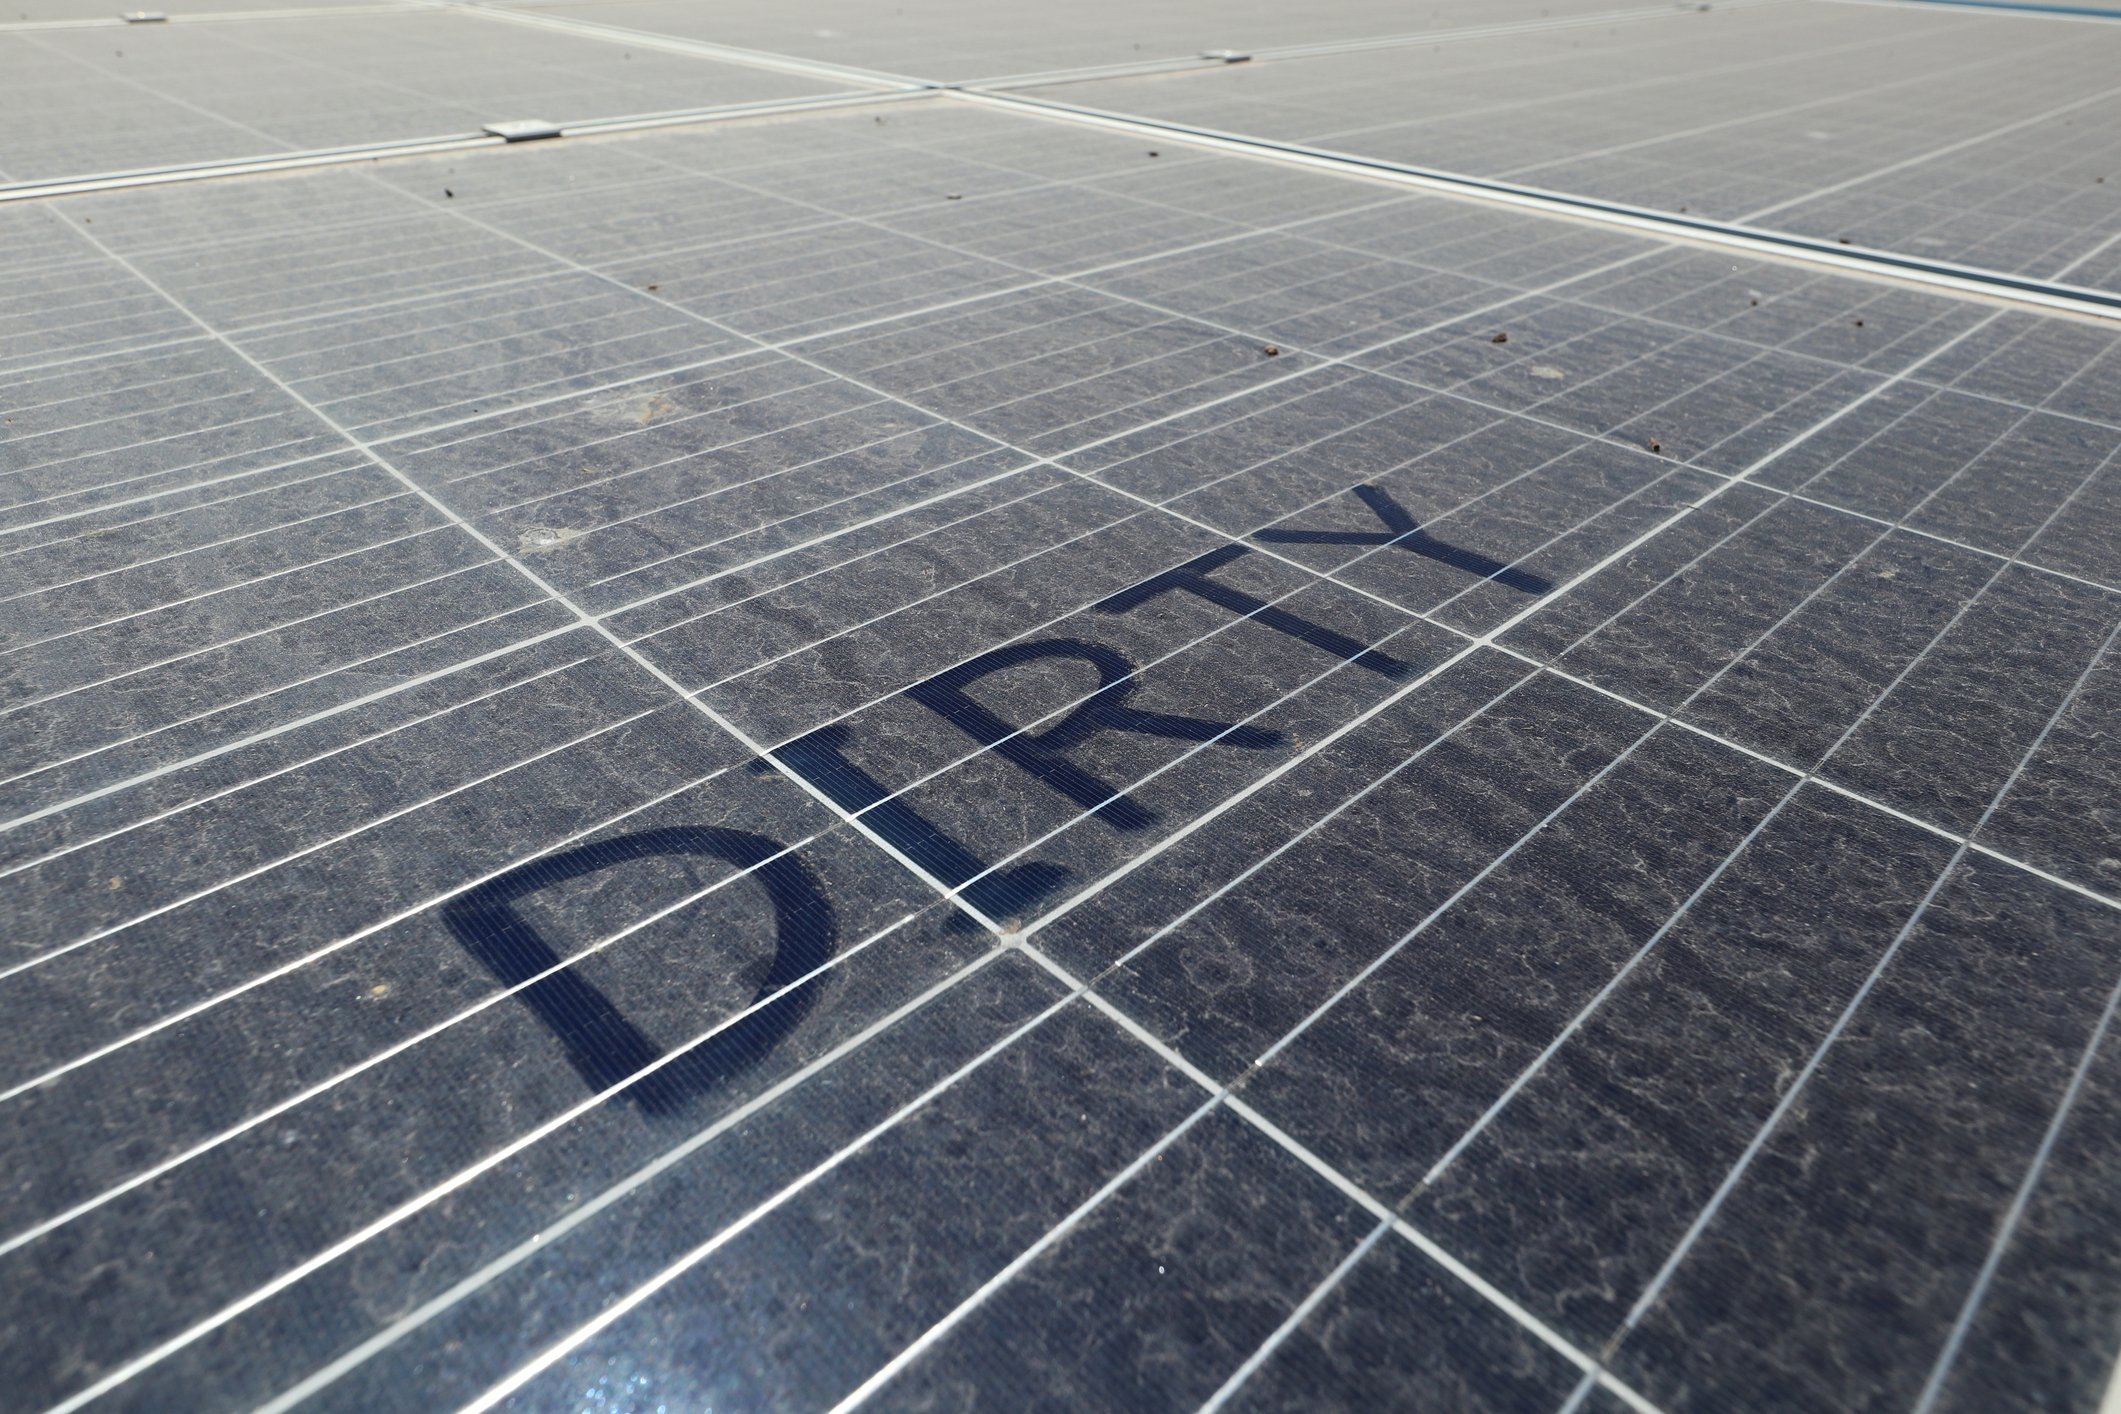 Impact of Dirty Solar Panels on Energy Production